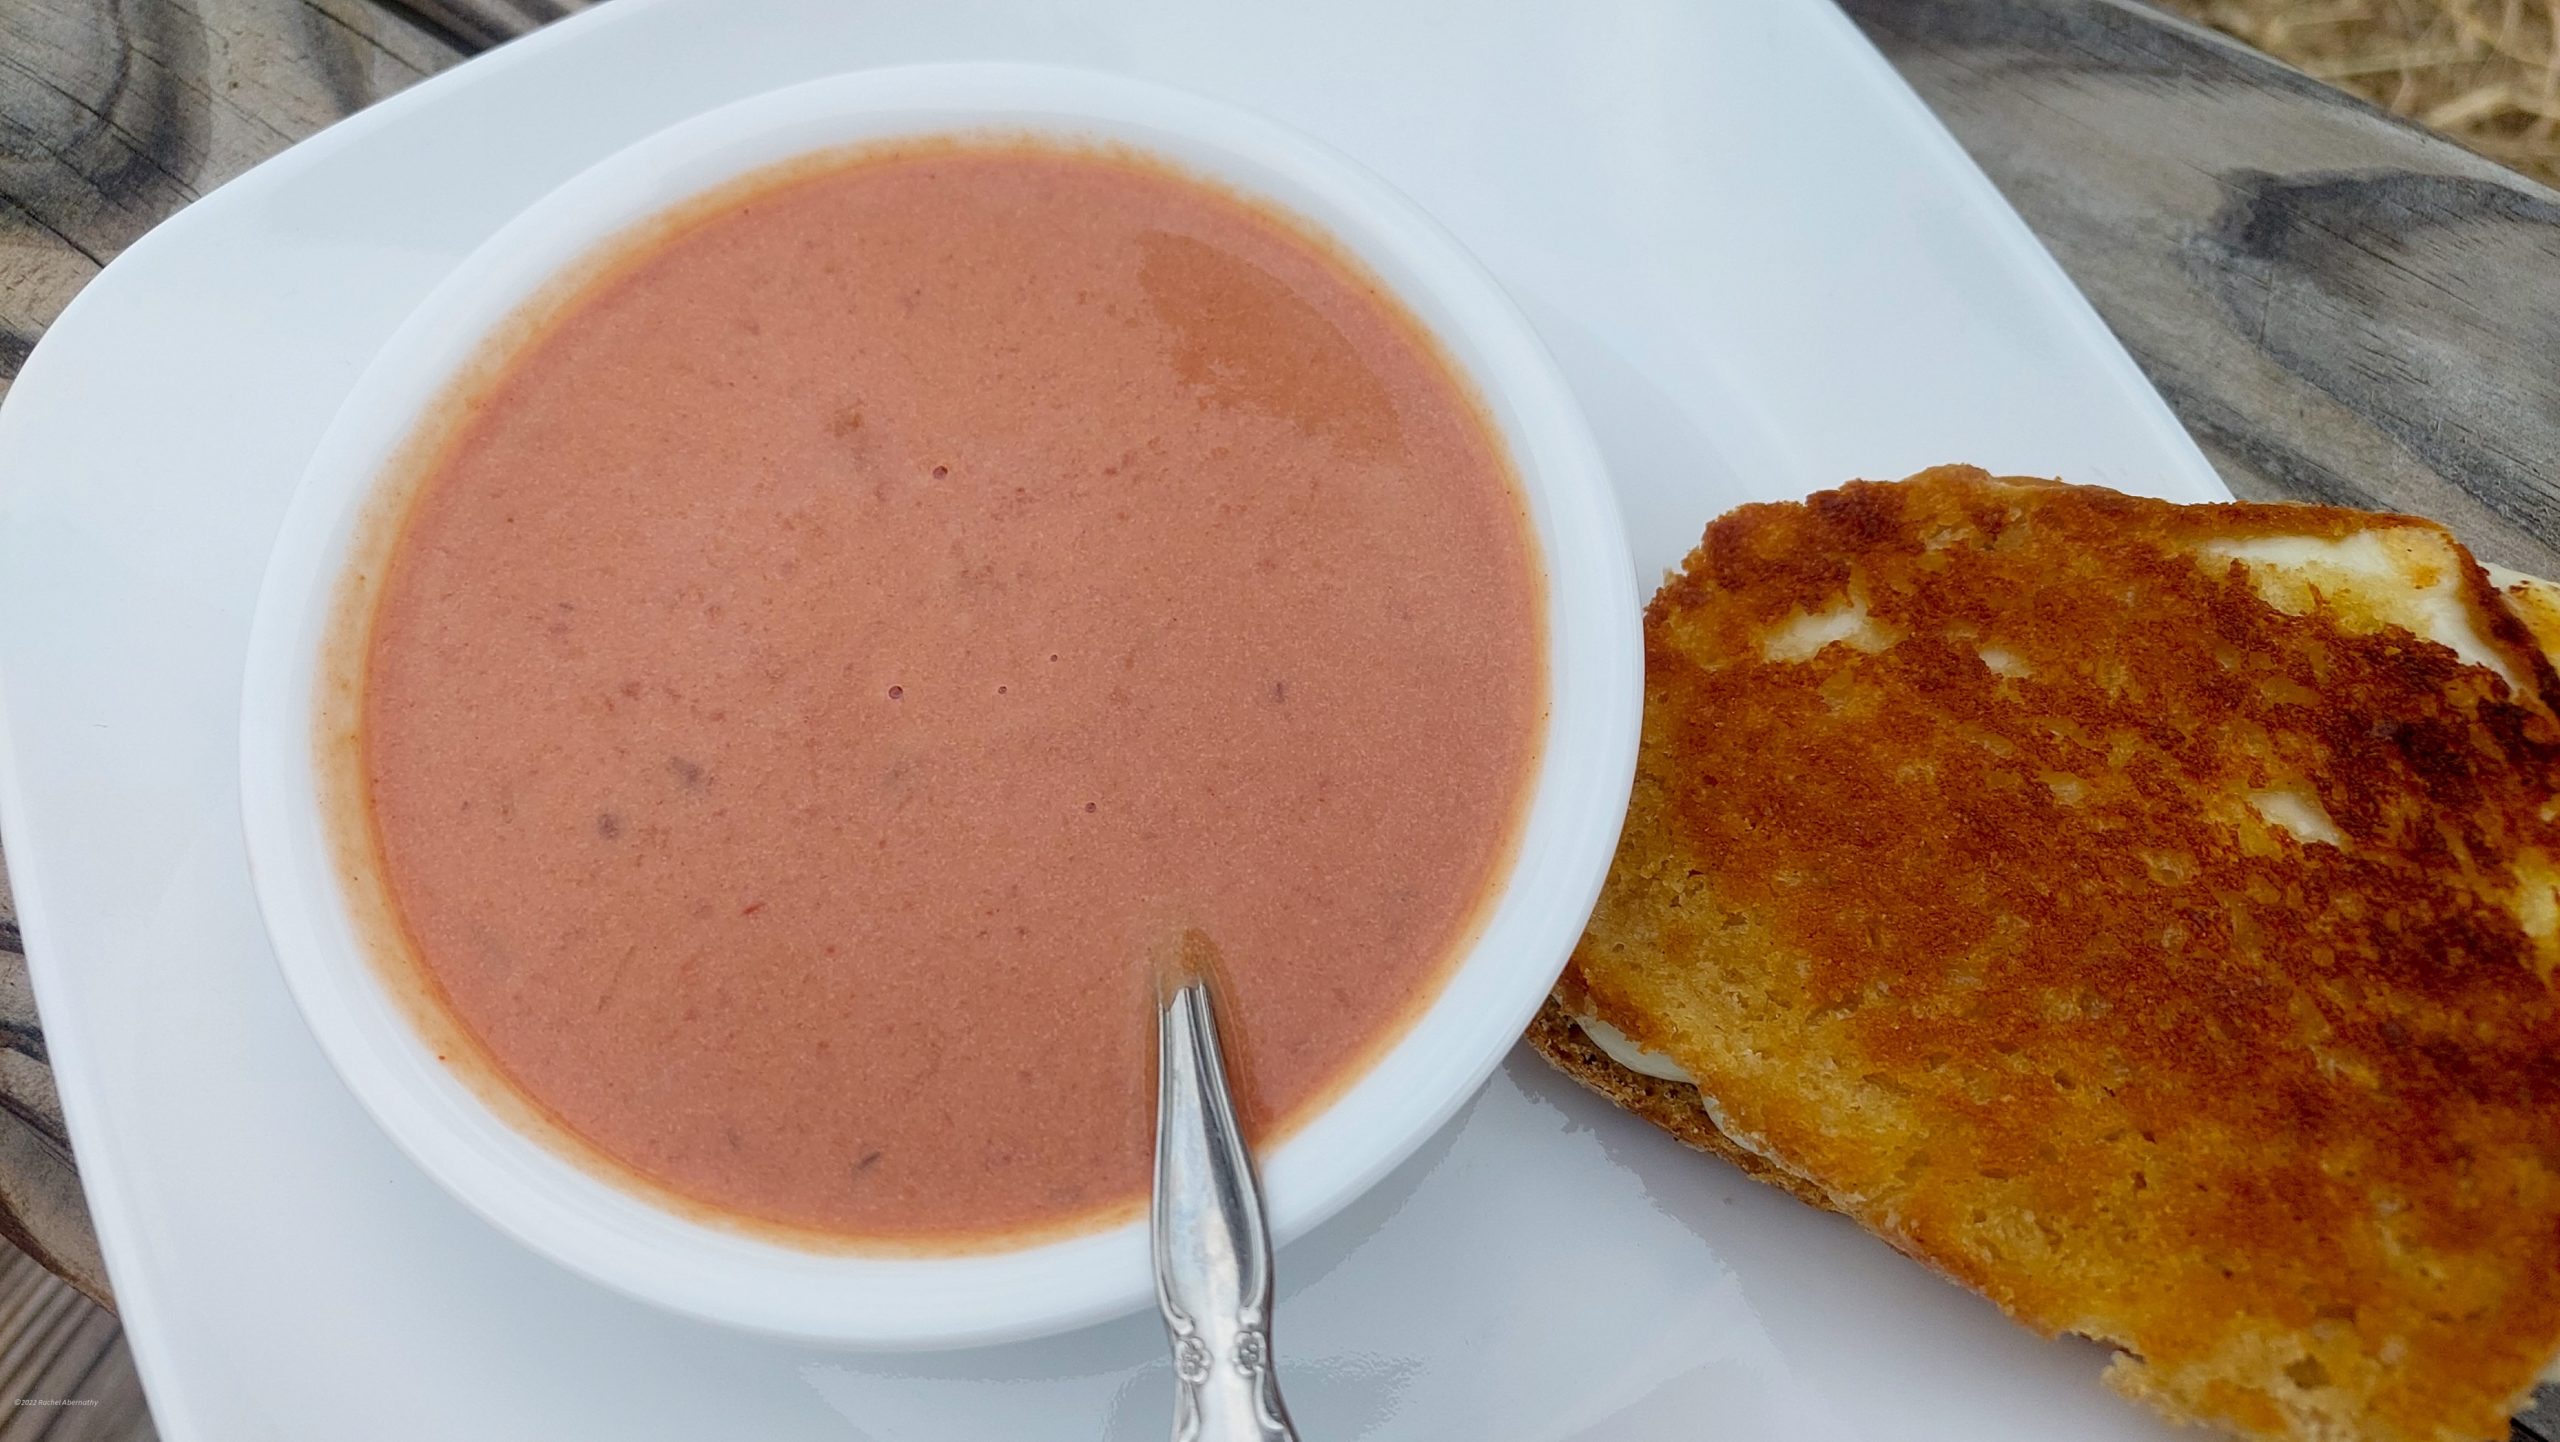 A creamy bowl of tomato soup with a grilled cheese sandwich on the side.